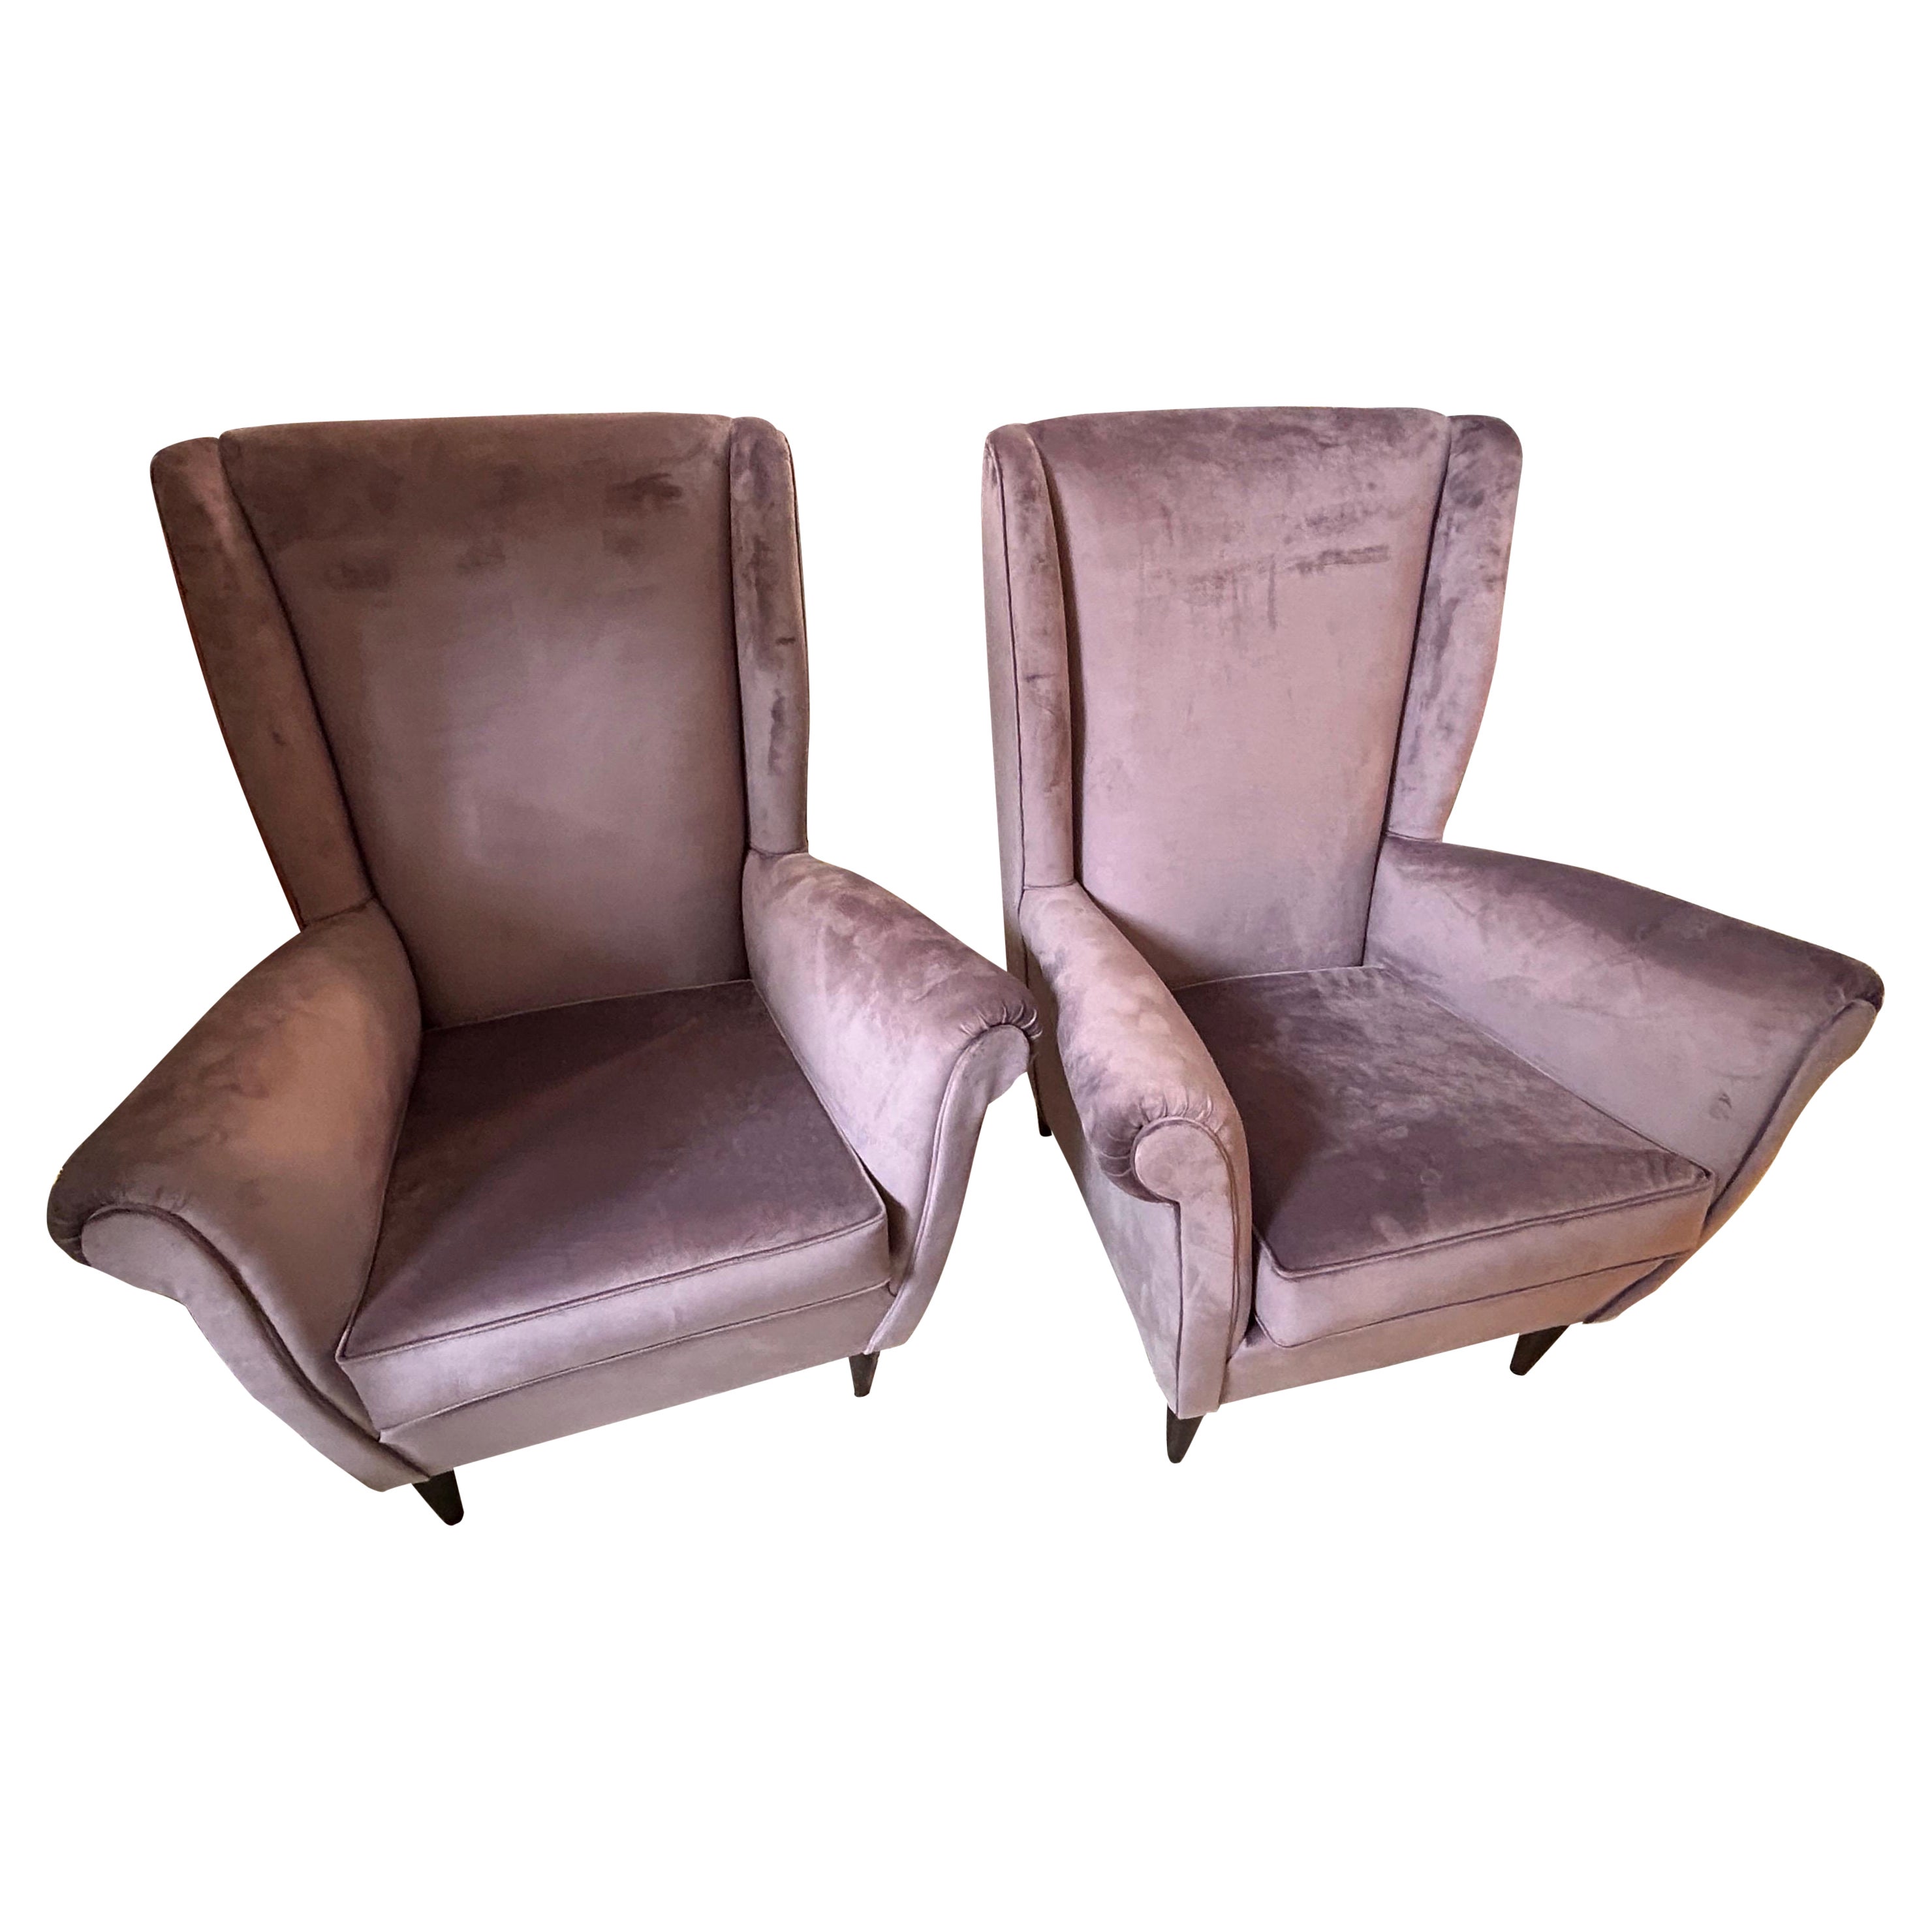 Two 1950s Gio Ponti Style Mid-Century Modern Armchairs Mod. 512 by ISA Bergamo For Sale